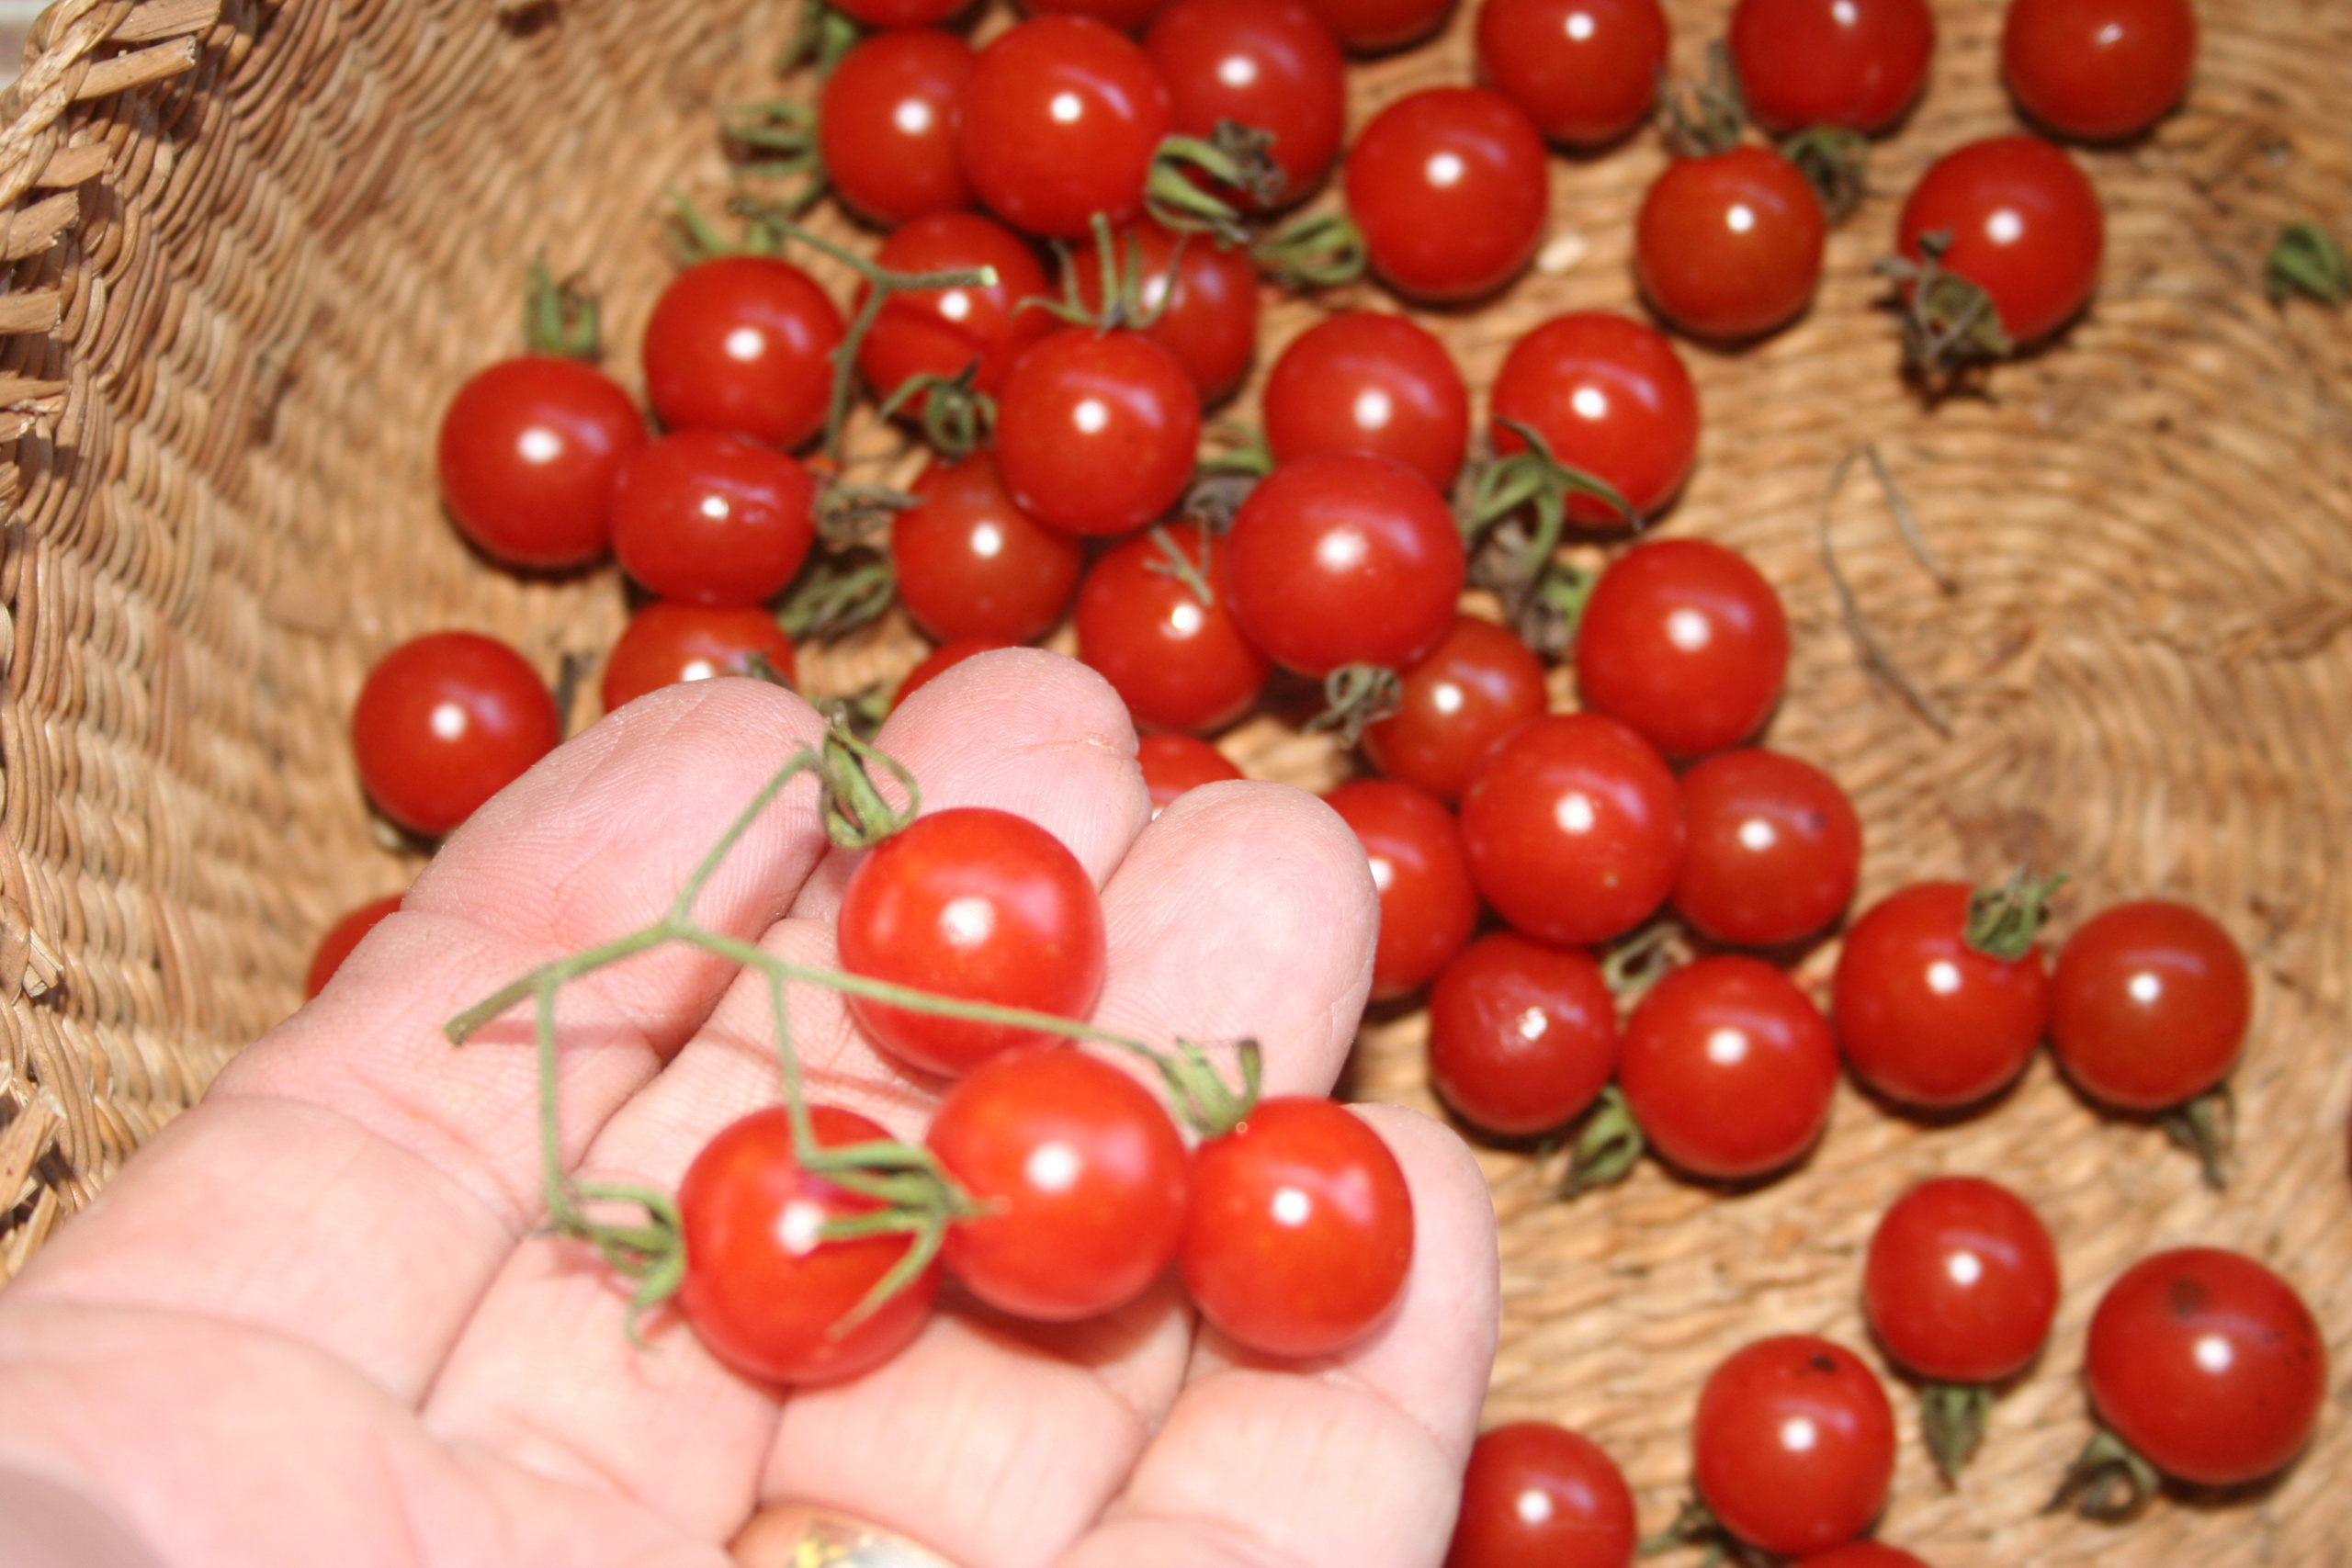 20 Tomato Seeds meat Tomato with good taste-from Turkey 